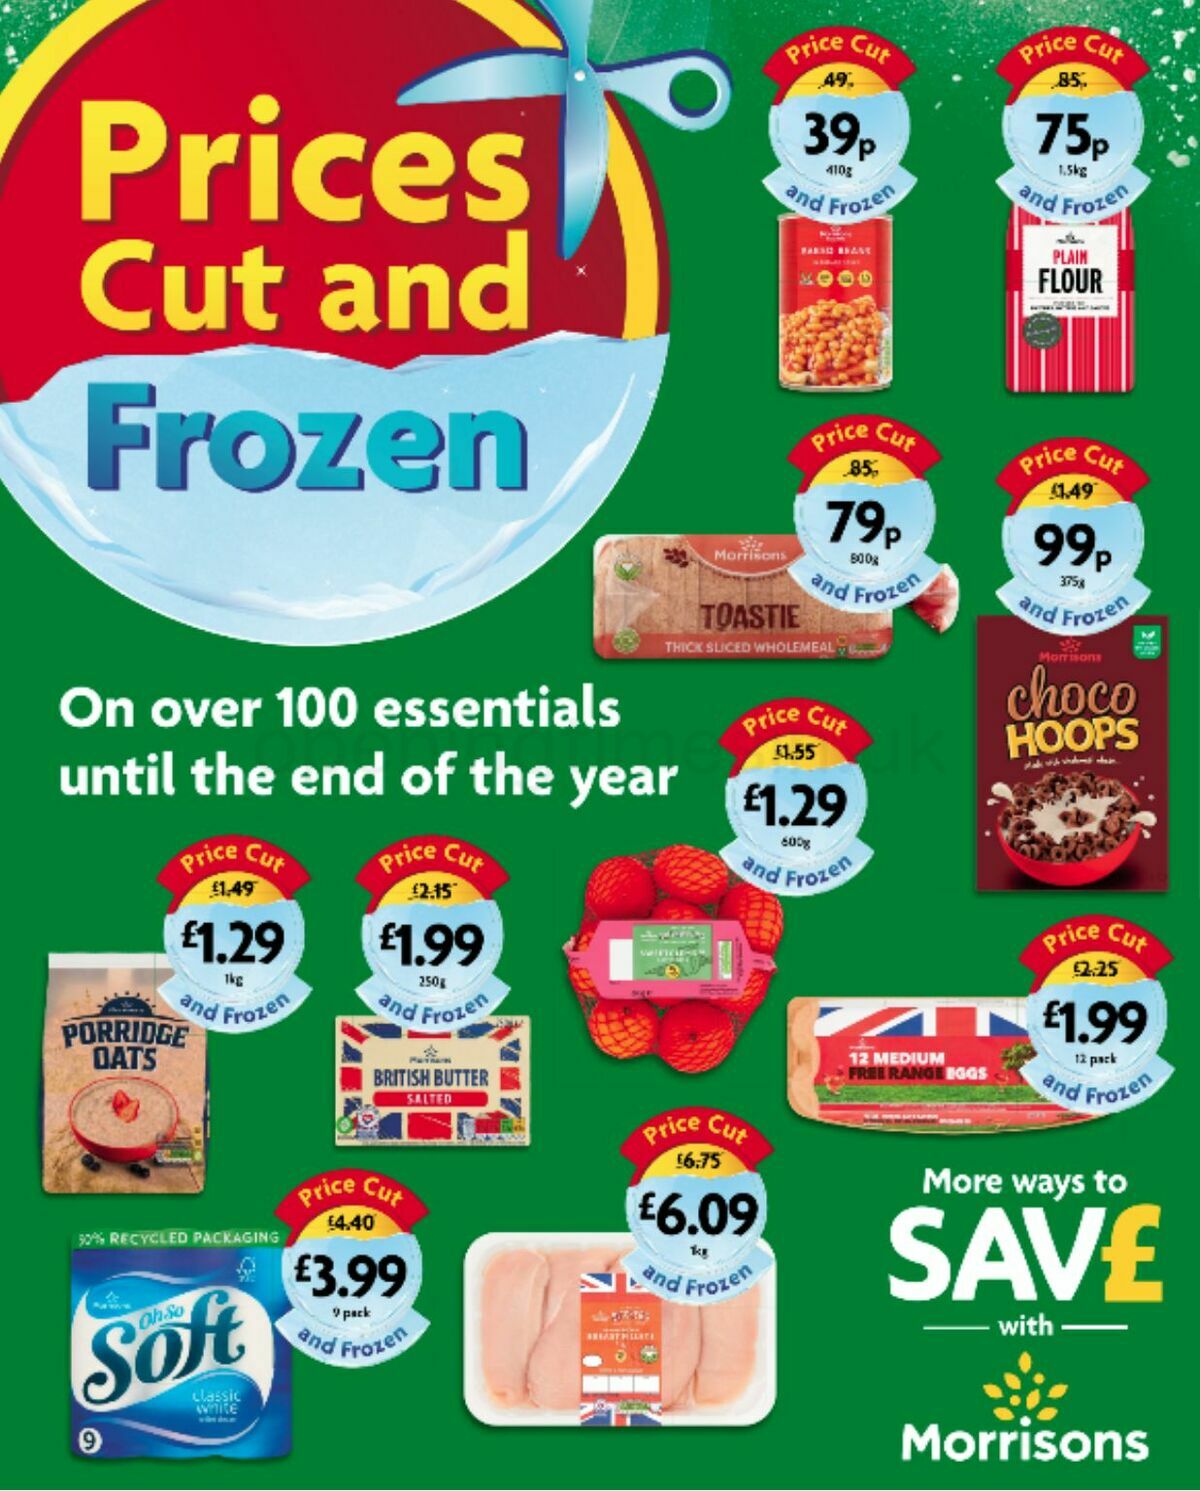 Morrisons Prices Cut & Frozen Offers from 10 October